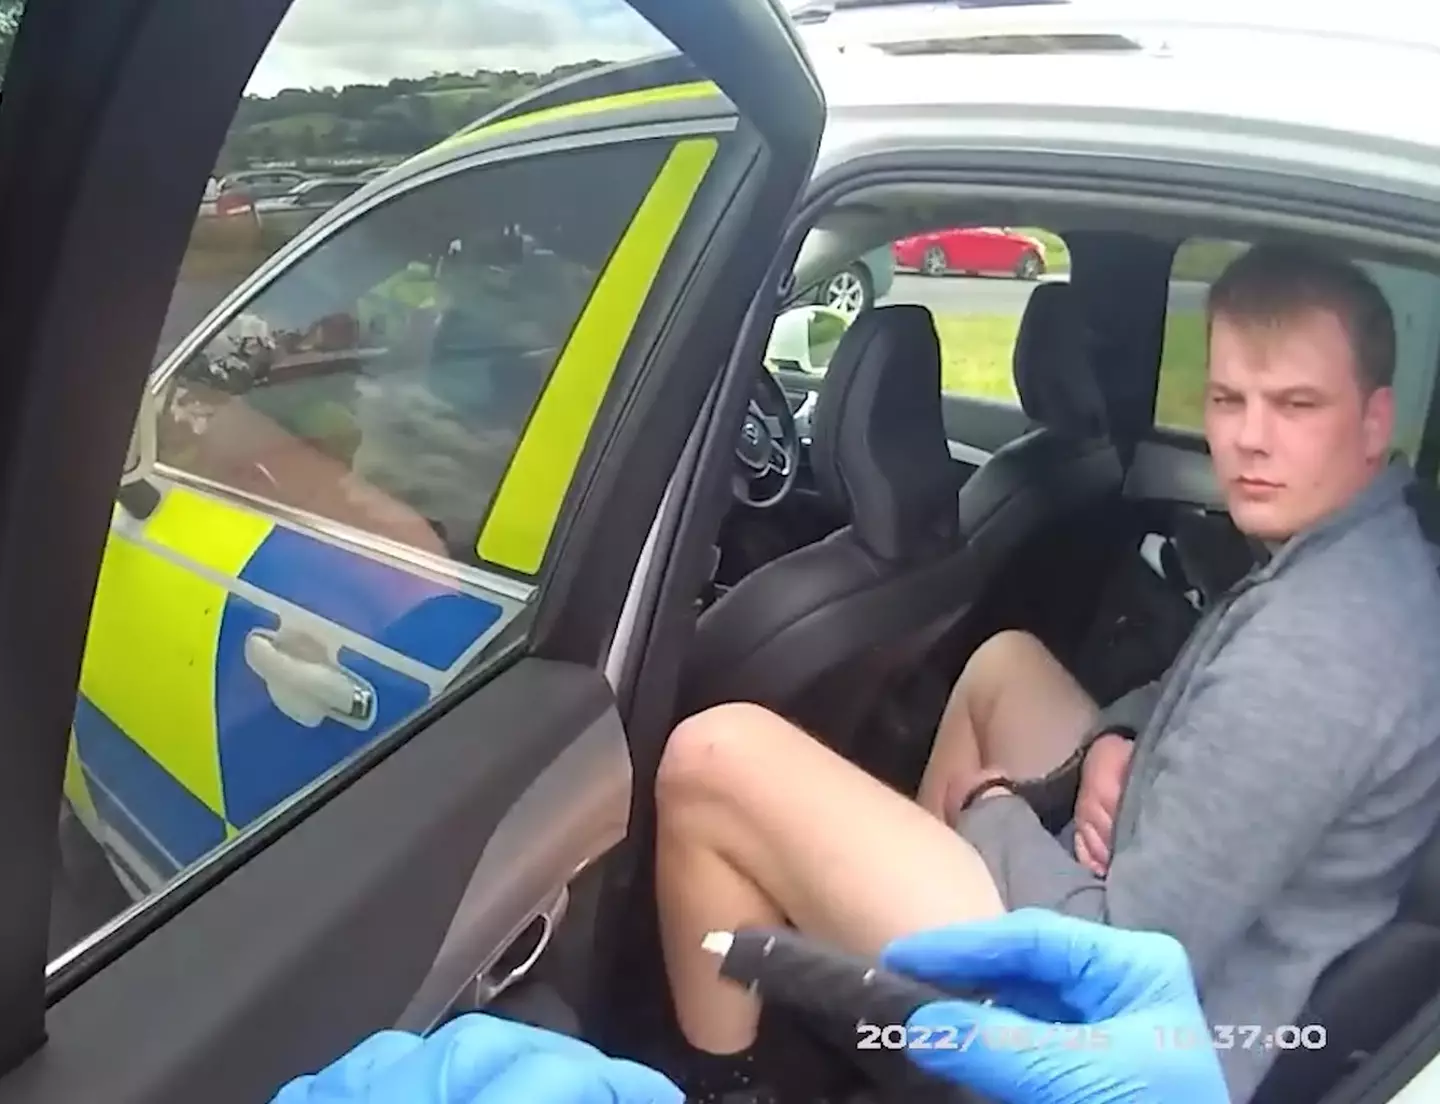 26-year-old Niall Barry was one of the men arrested on the way to Glastonbury.